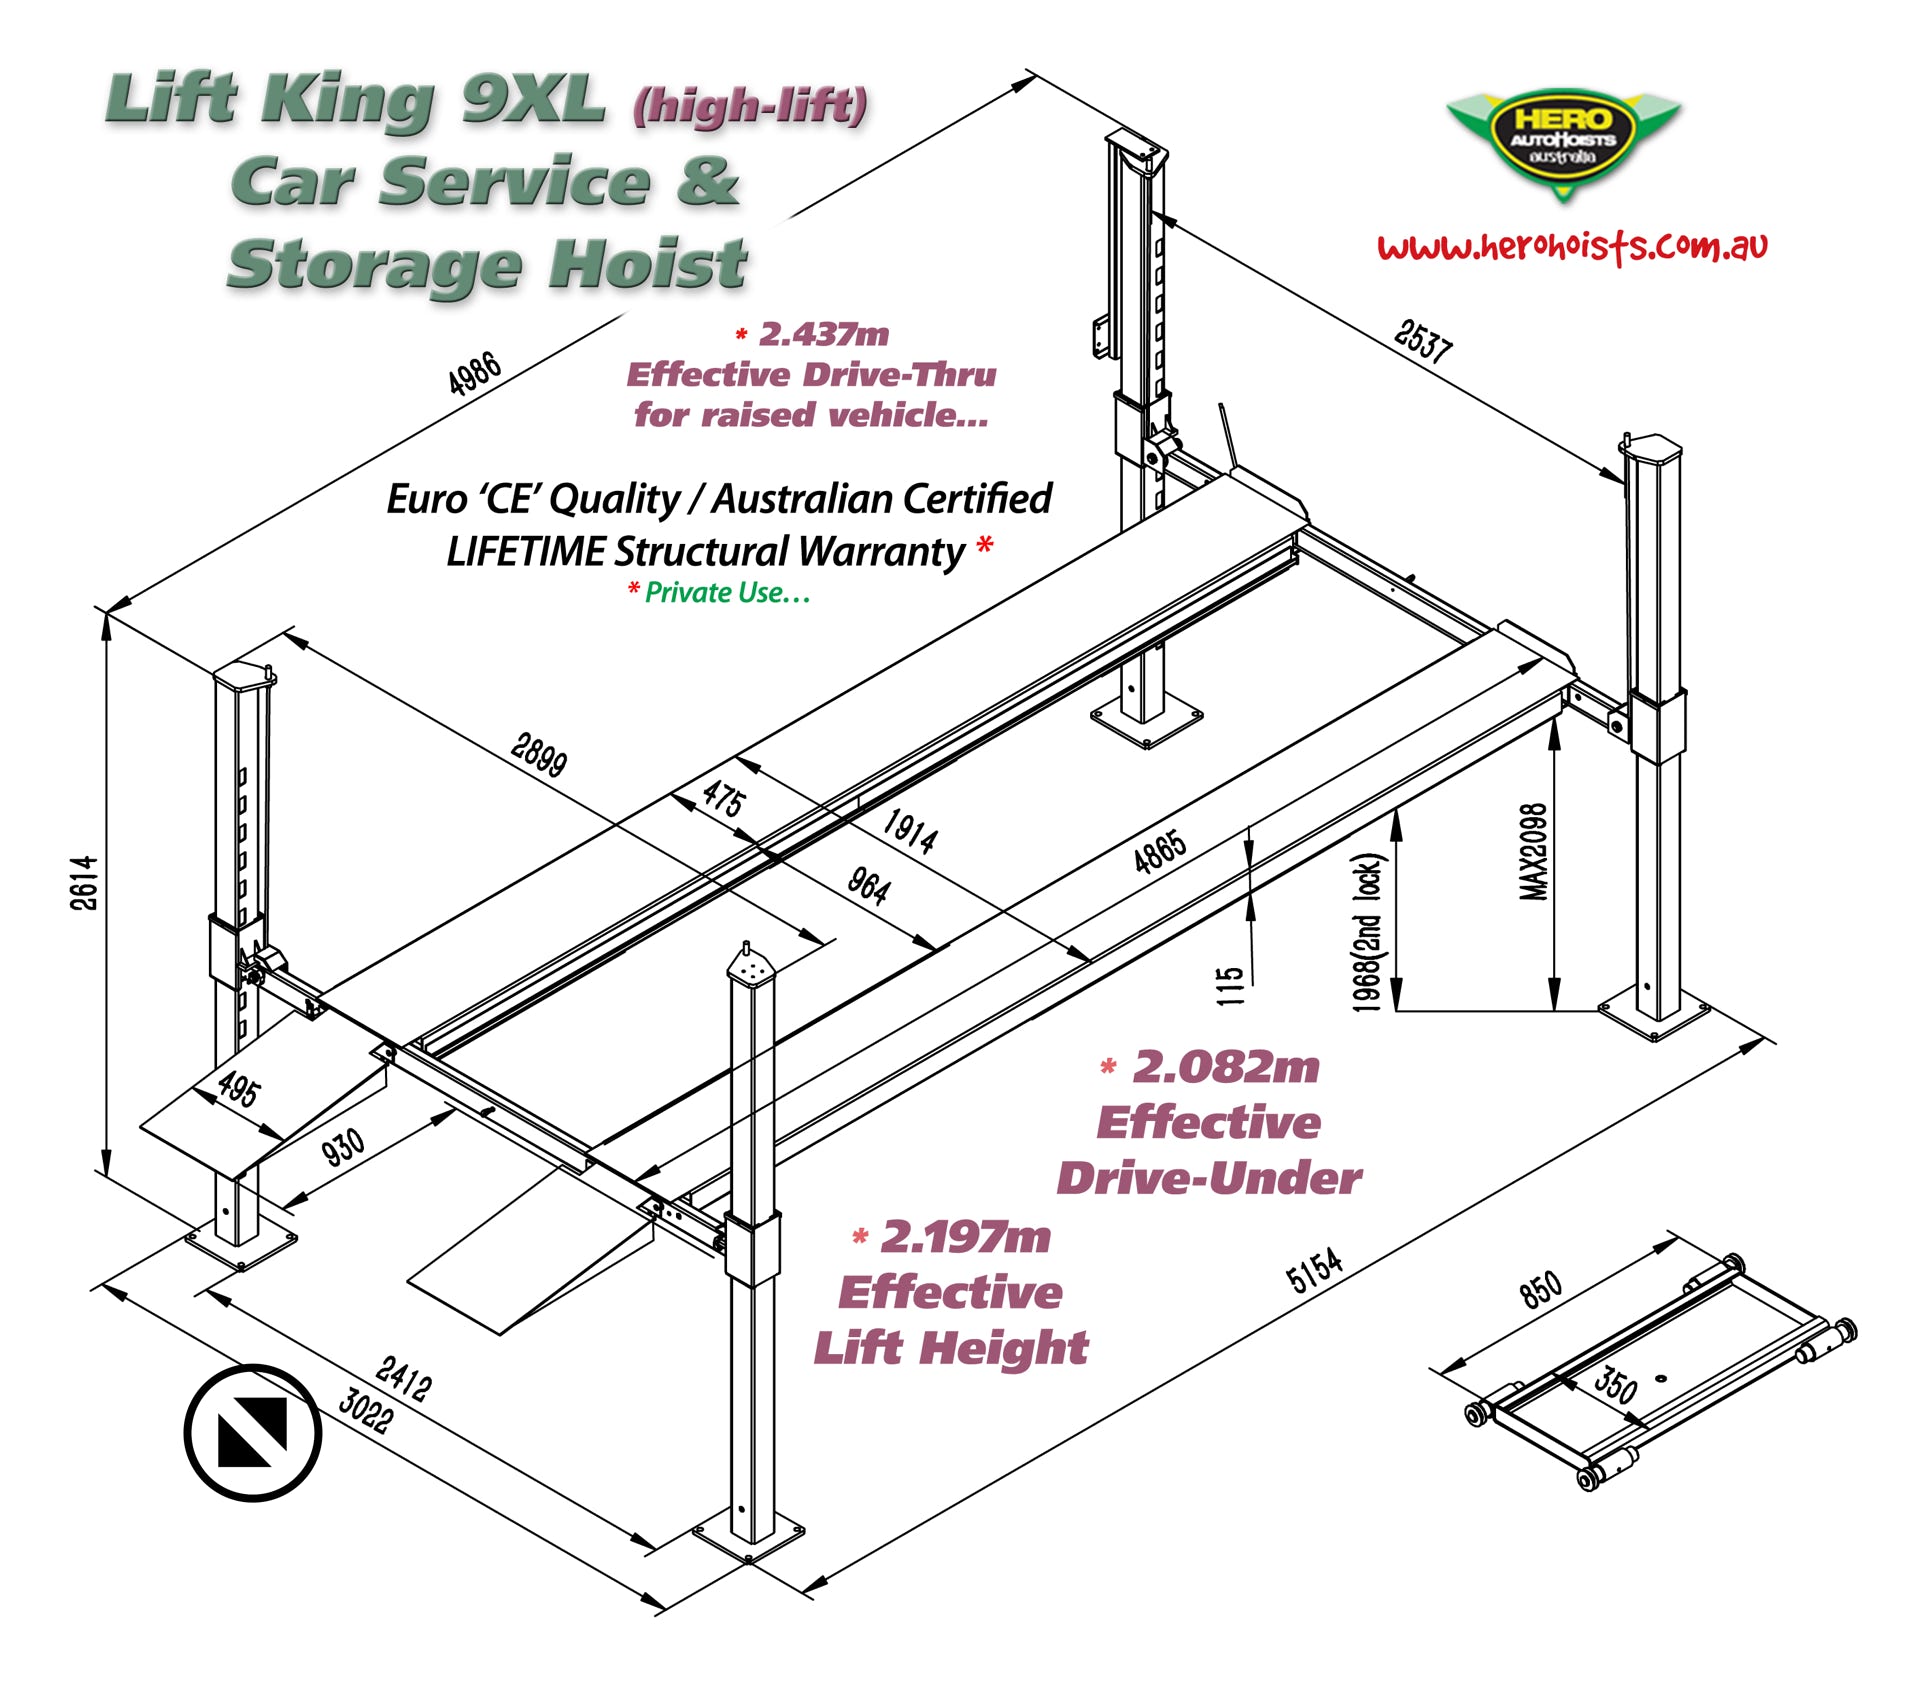 High-Lift model - installs into just 2.870m (approx). 3rd Gen Design. Australian / USA and Euro Certified. 4000kgs Capacity• Box-section ‘Posi-Lock’ Posts  • Sleeved ‘Wrap-around’ Crossbar design • Lightweight Alloy Approach Ramps • Flow-Control Valve • Freestanding / Portable 